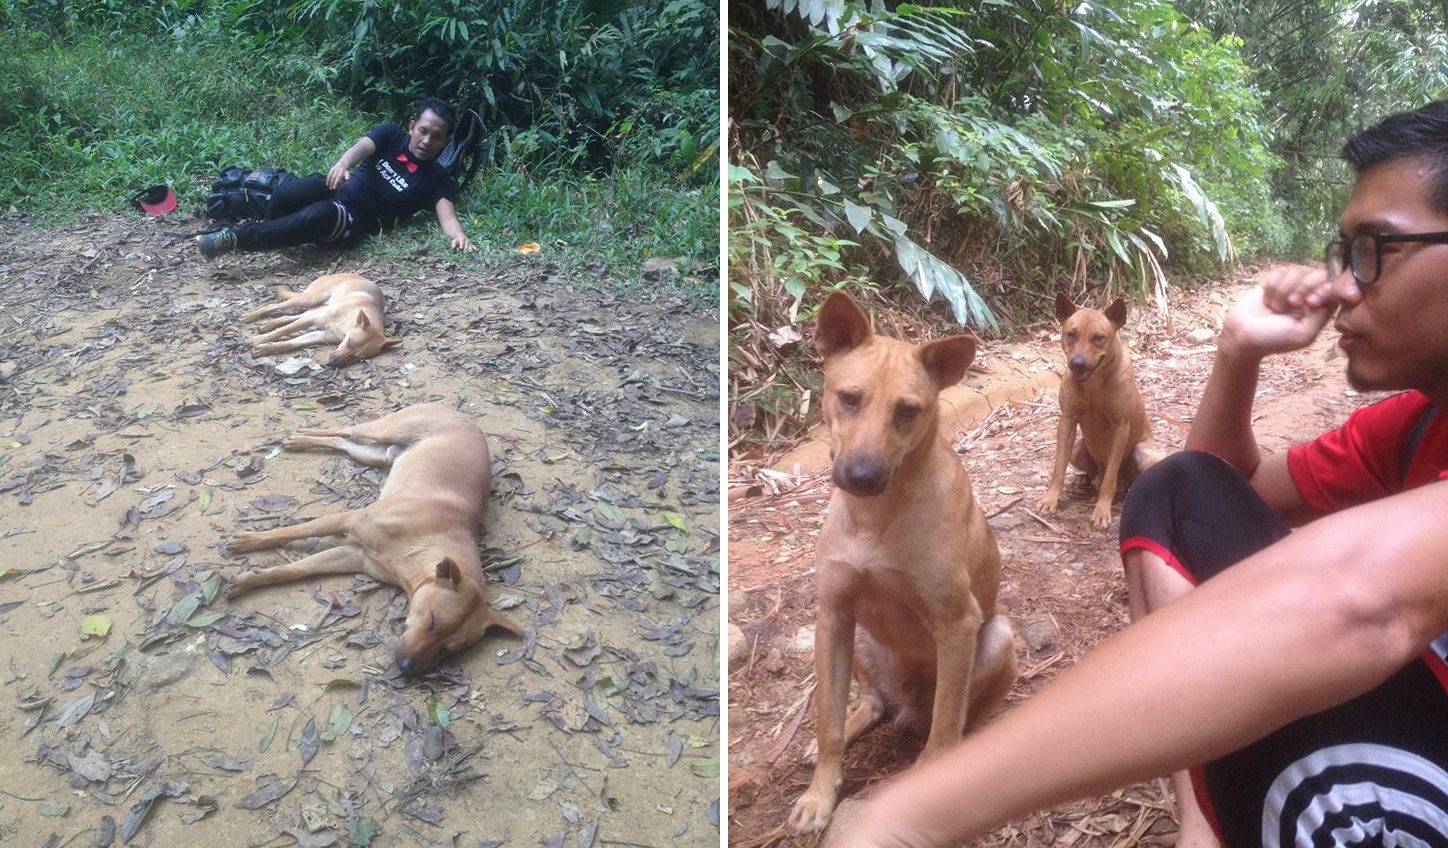 Malaysian Malay Group Were Protected by 2 Dogs During Their Hike In Gunung Nuang - World Of Buzz